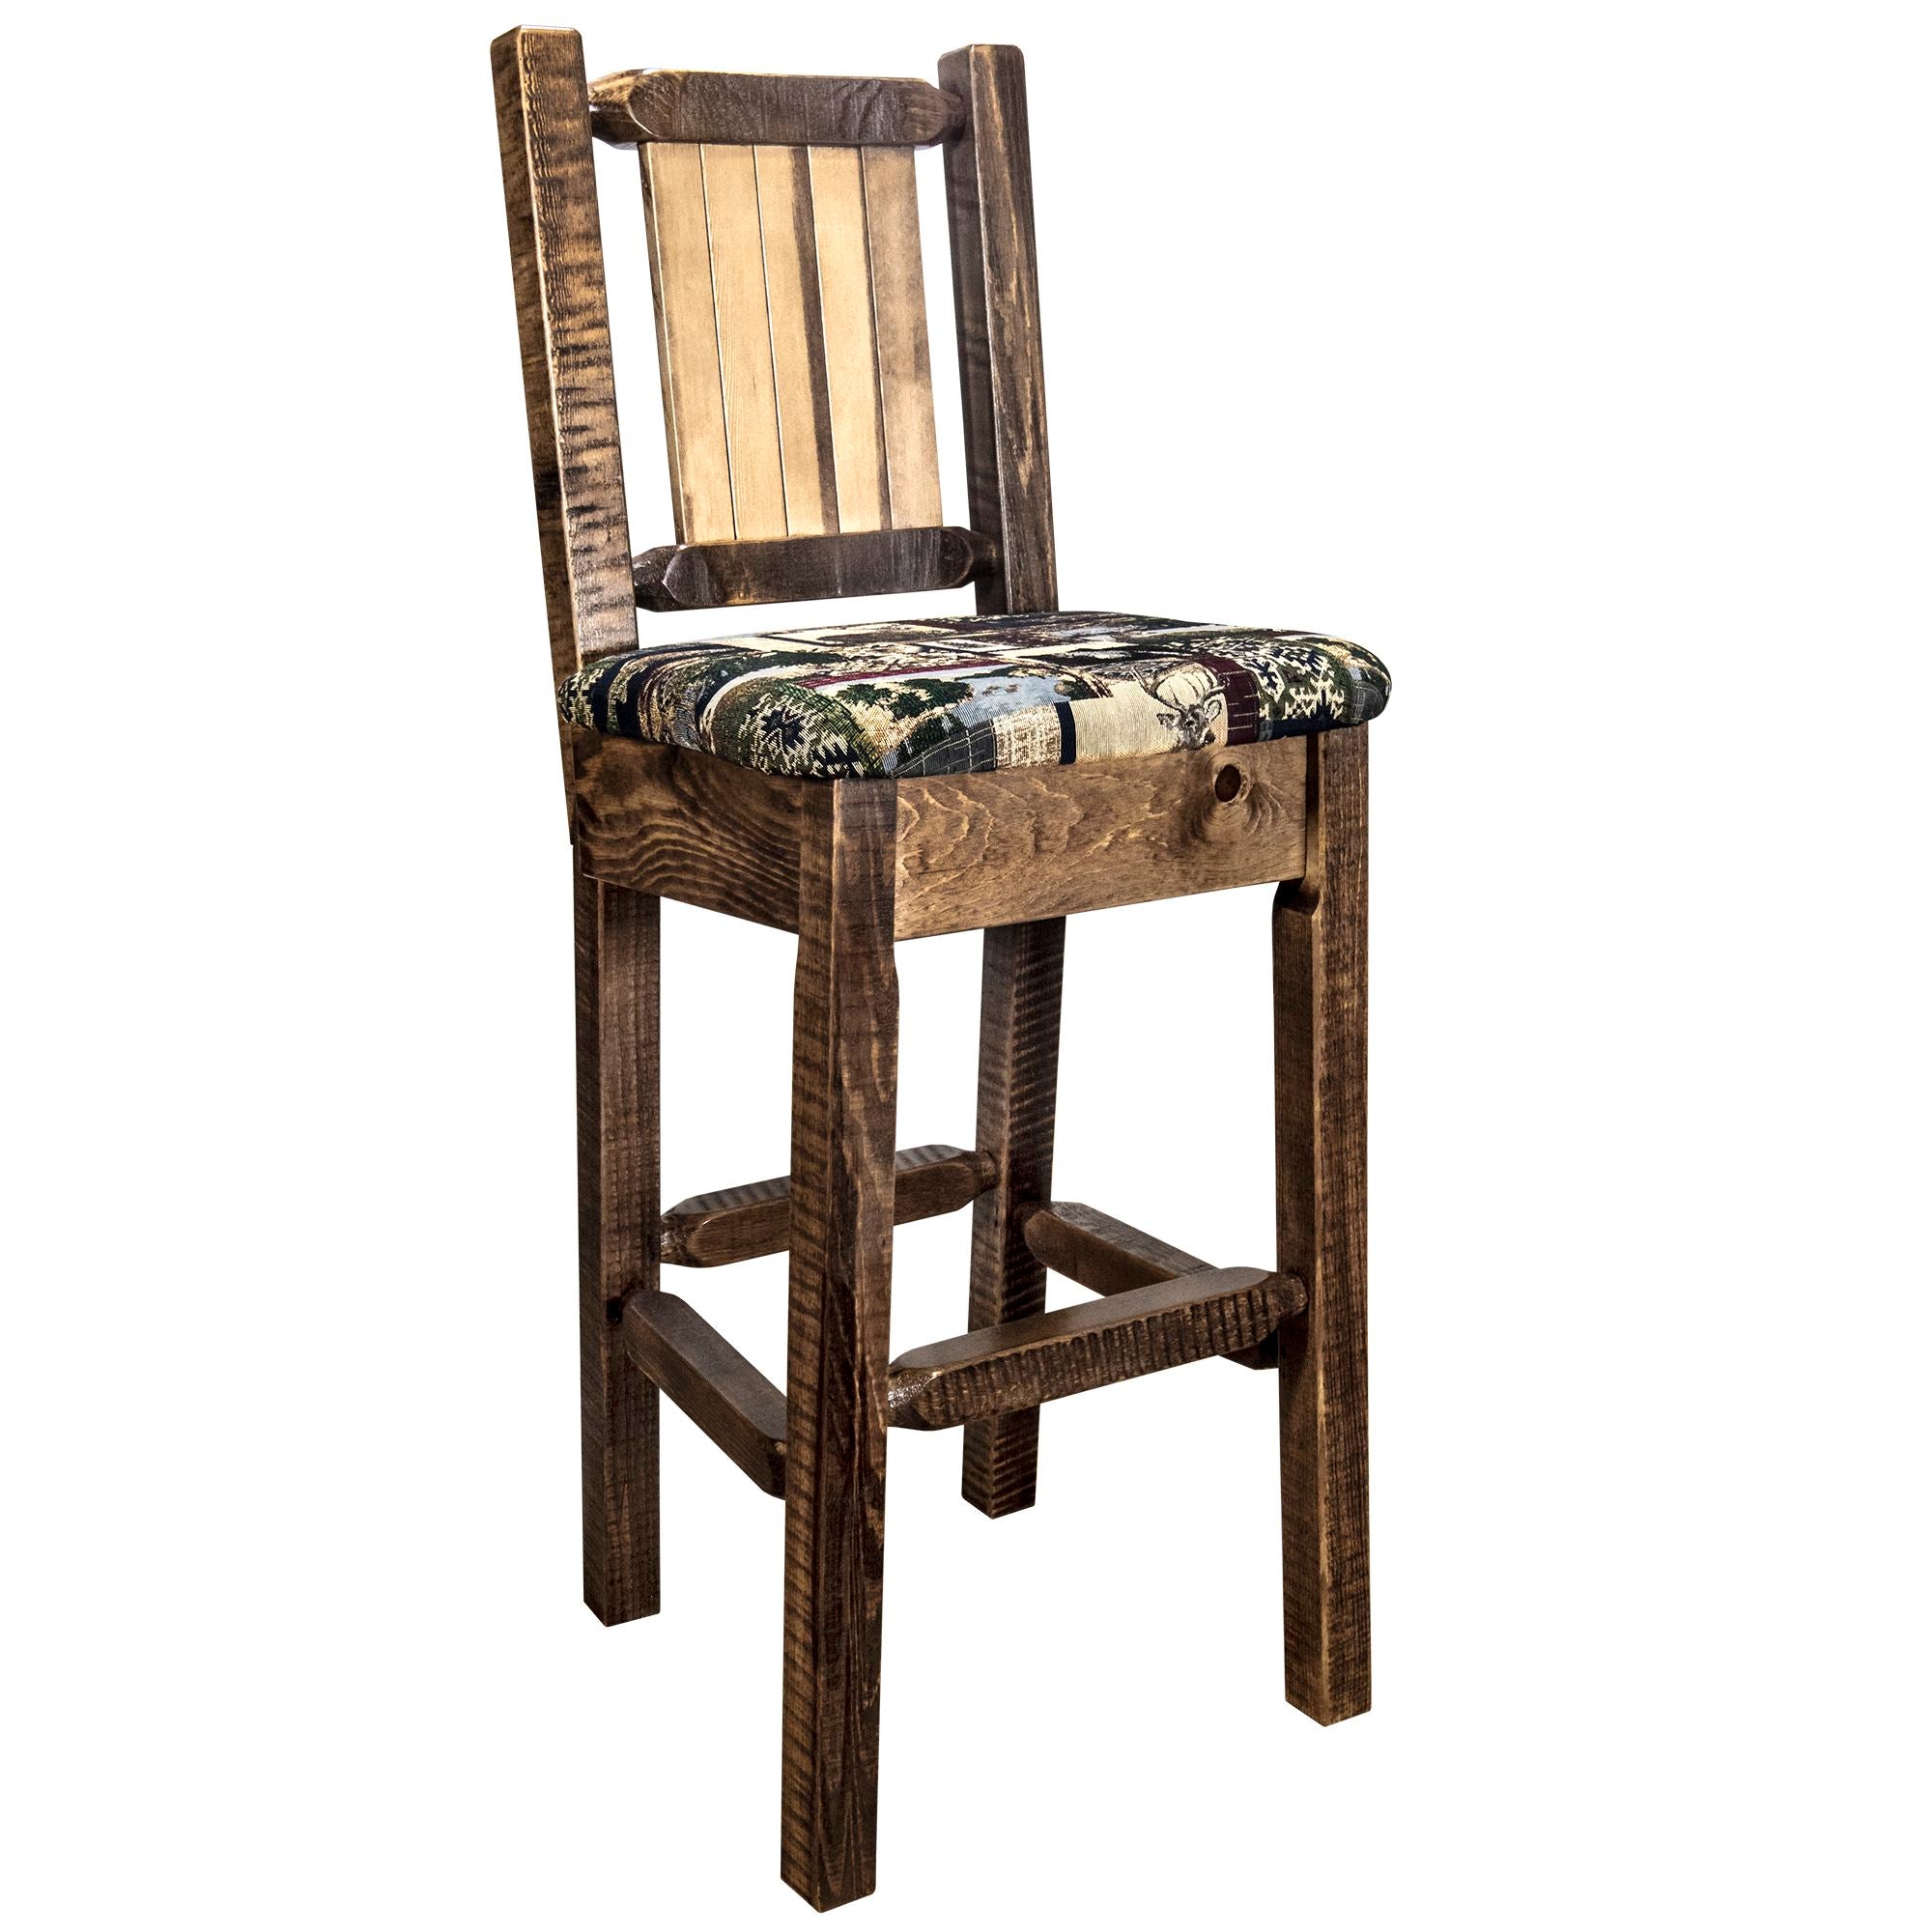 Montana Woodworks Homestead Collection Barstool w/ Back - Woodland Upholstery, w/ Laser Engraved Stain & Lacquer Finish